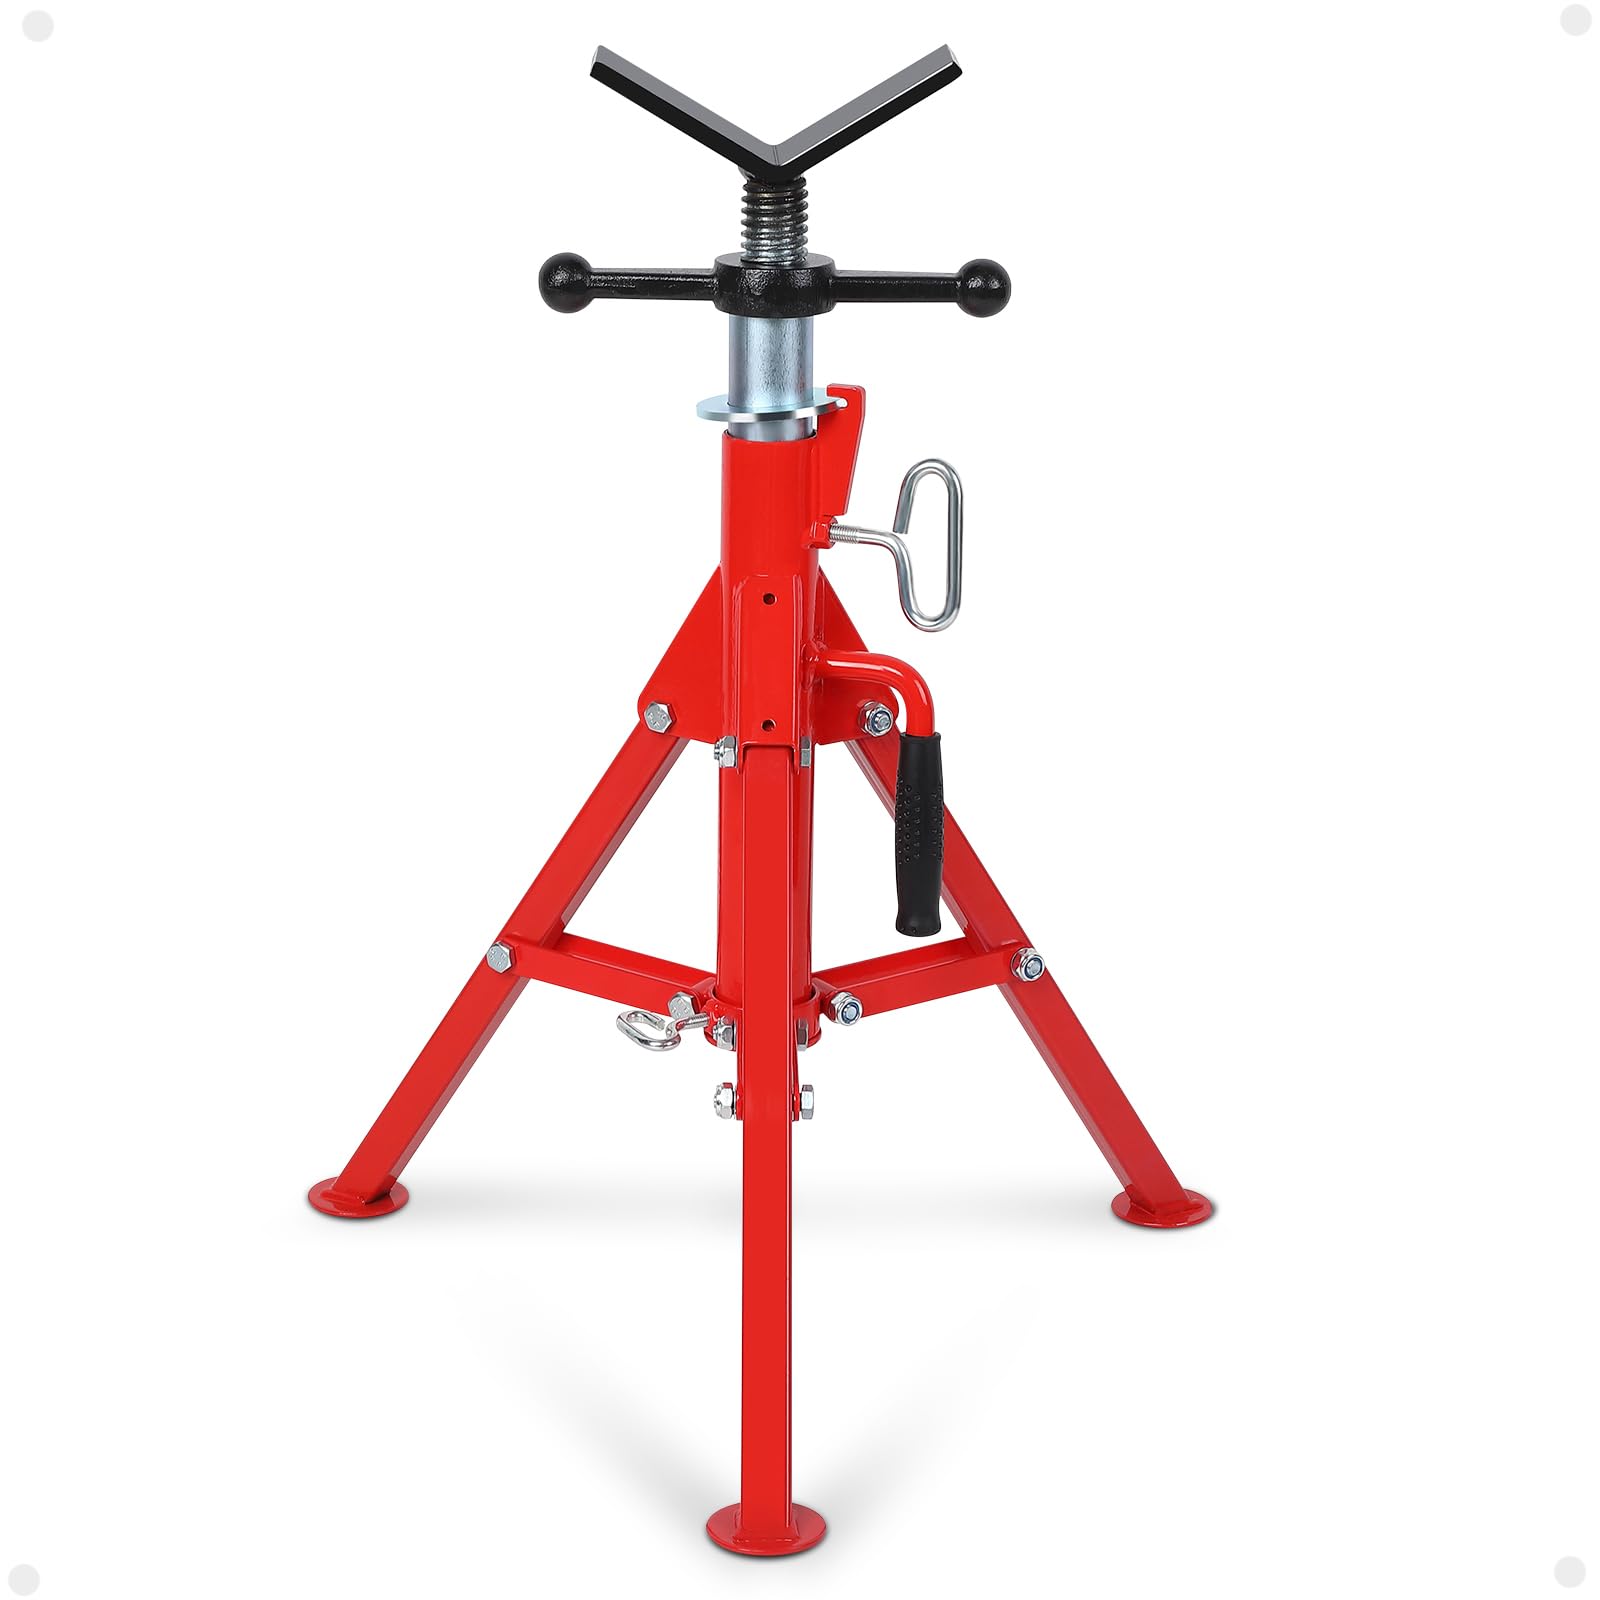 GARVEE V Head Pipe Stand with Adjustable Height 28-52 Inch, Foldable & Portable Pipe Jack Stand with 2500 LB Capacity, 1/2 to 12 Inch Pipe Supporting for Pipefitters，Welding and Pipe Threading